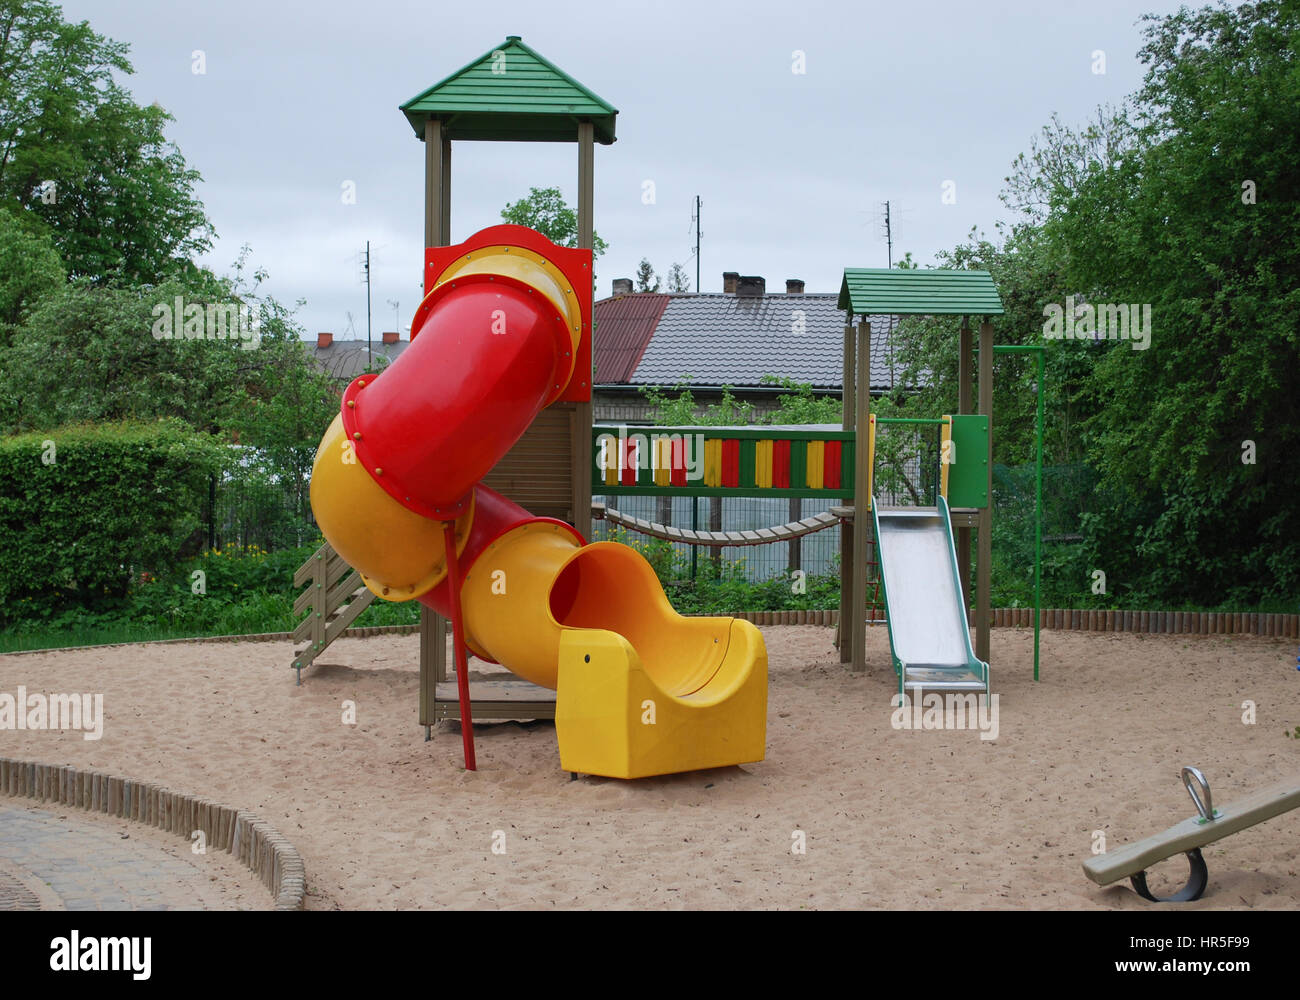 Children’s multi colors playground in public park. Bridge, stairs, slide, platforms. Place for games and sports activities. Stock Photo